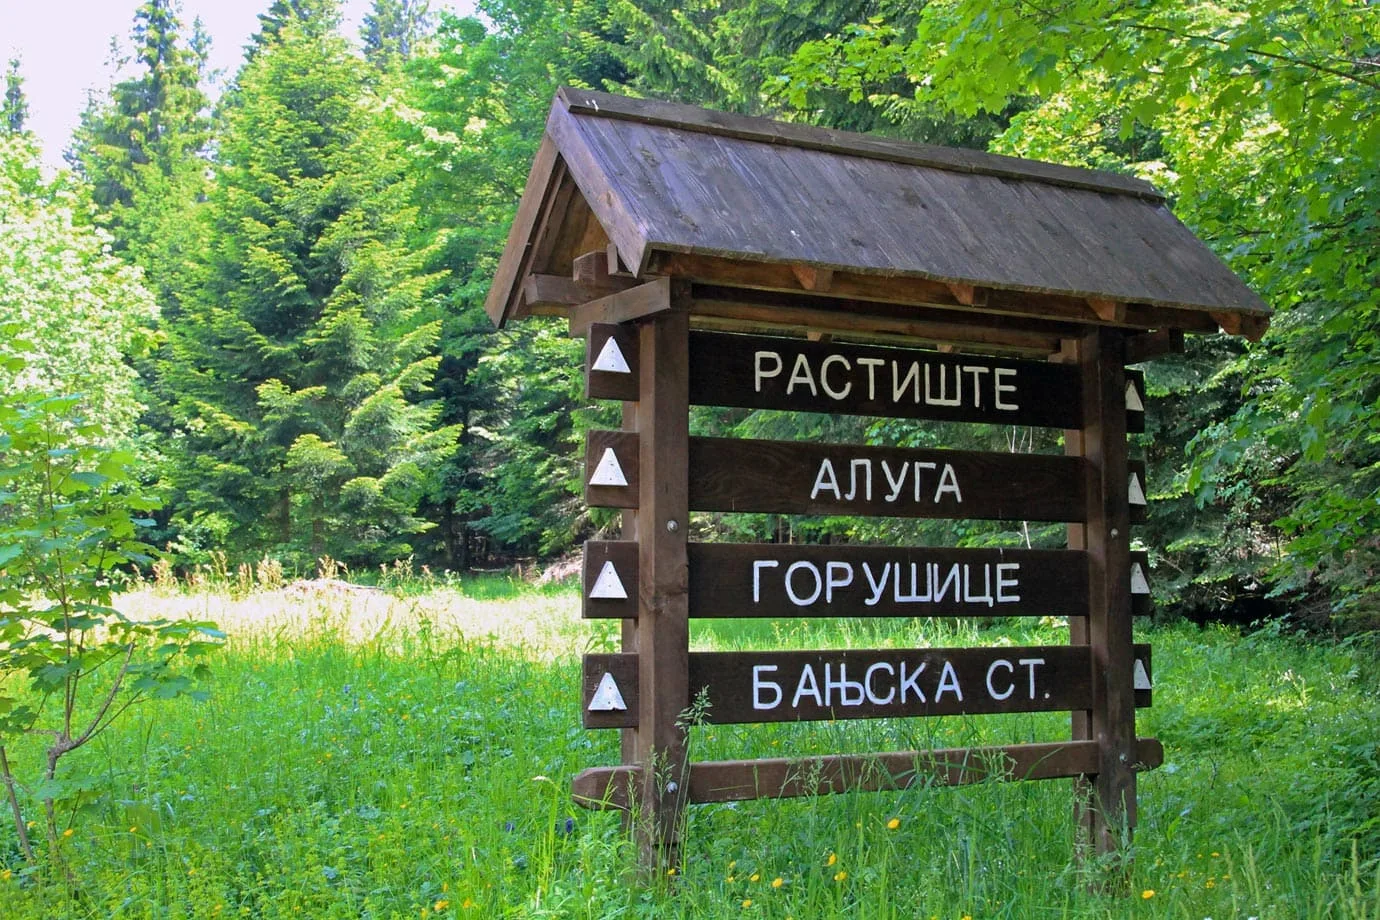 The start of the trail to Banska Rock